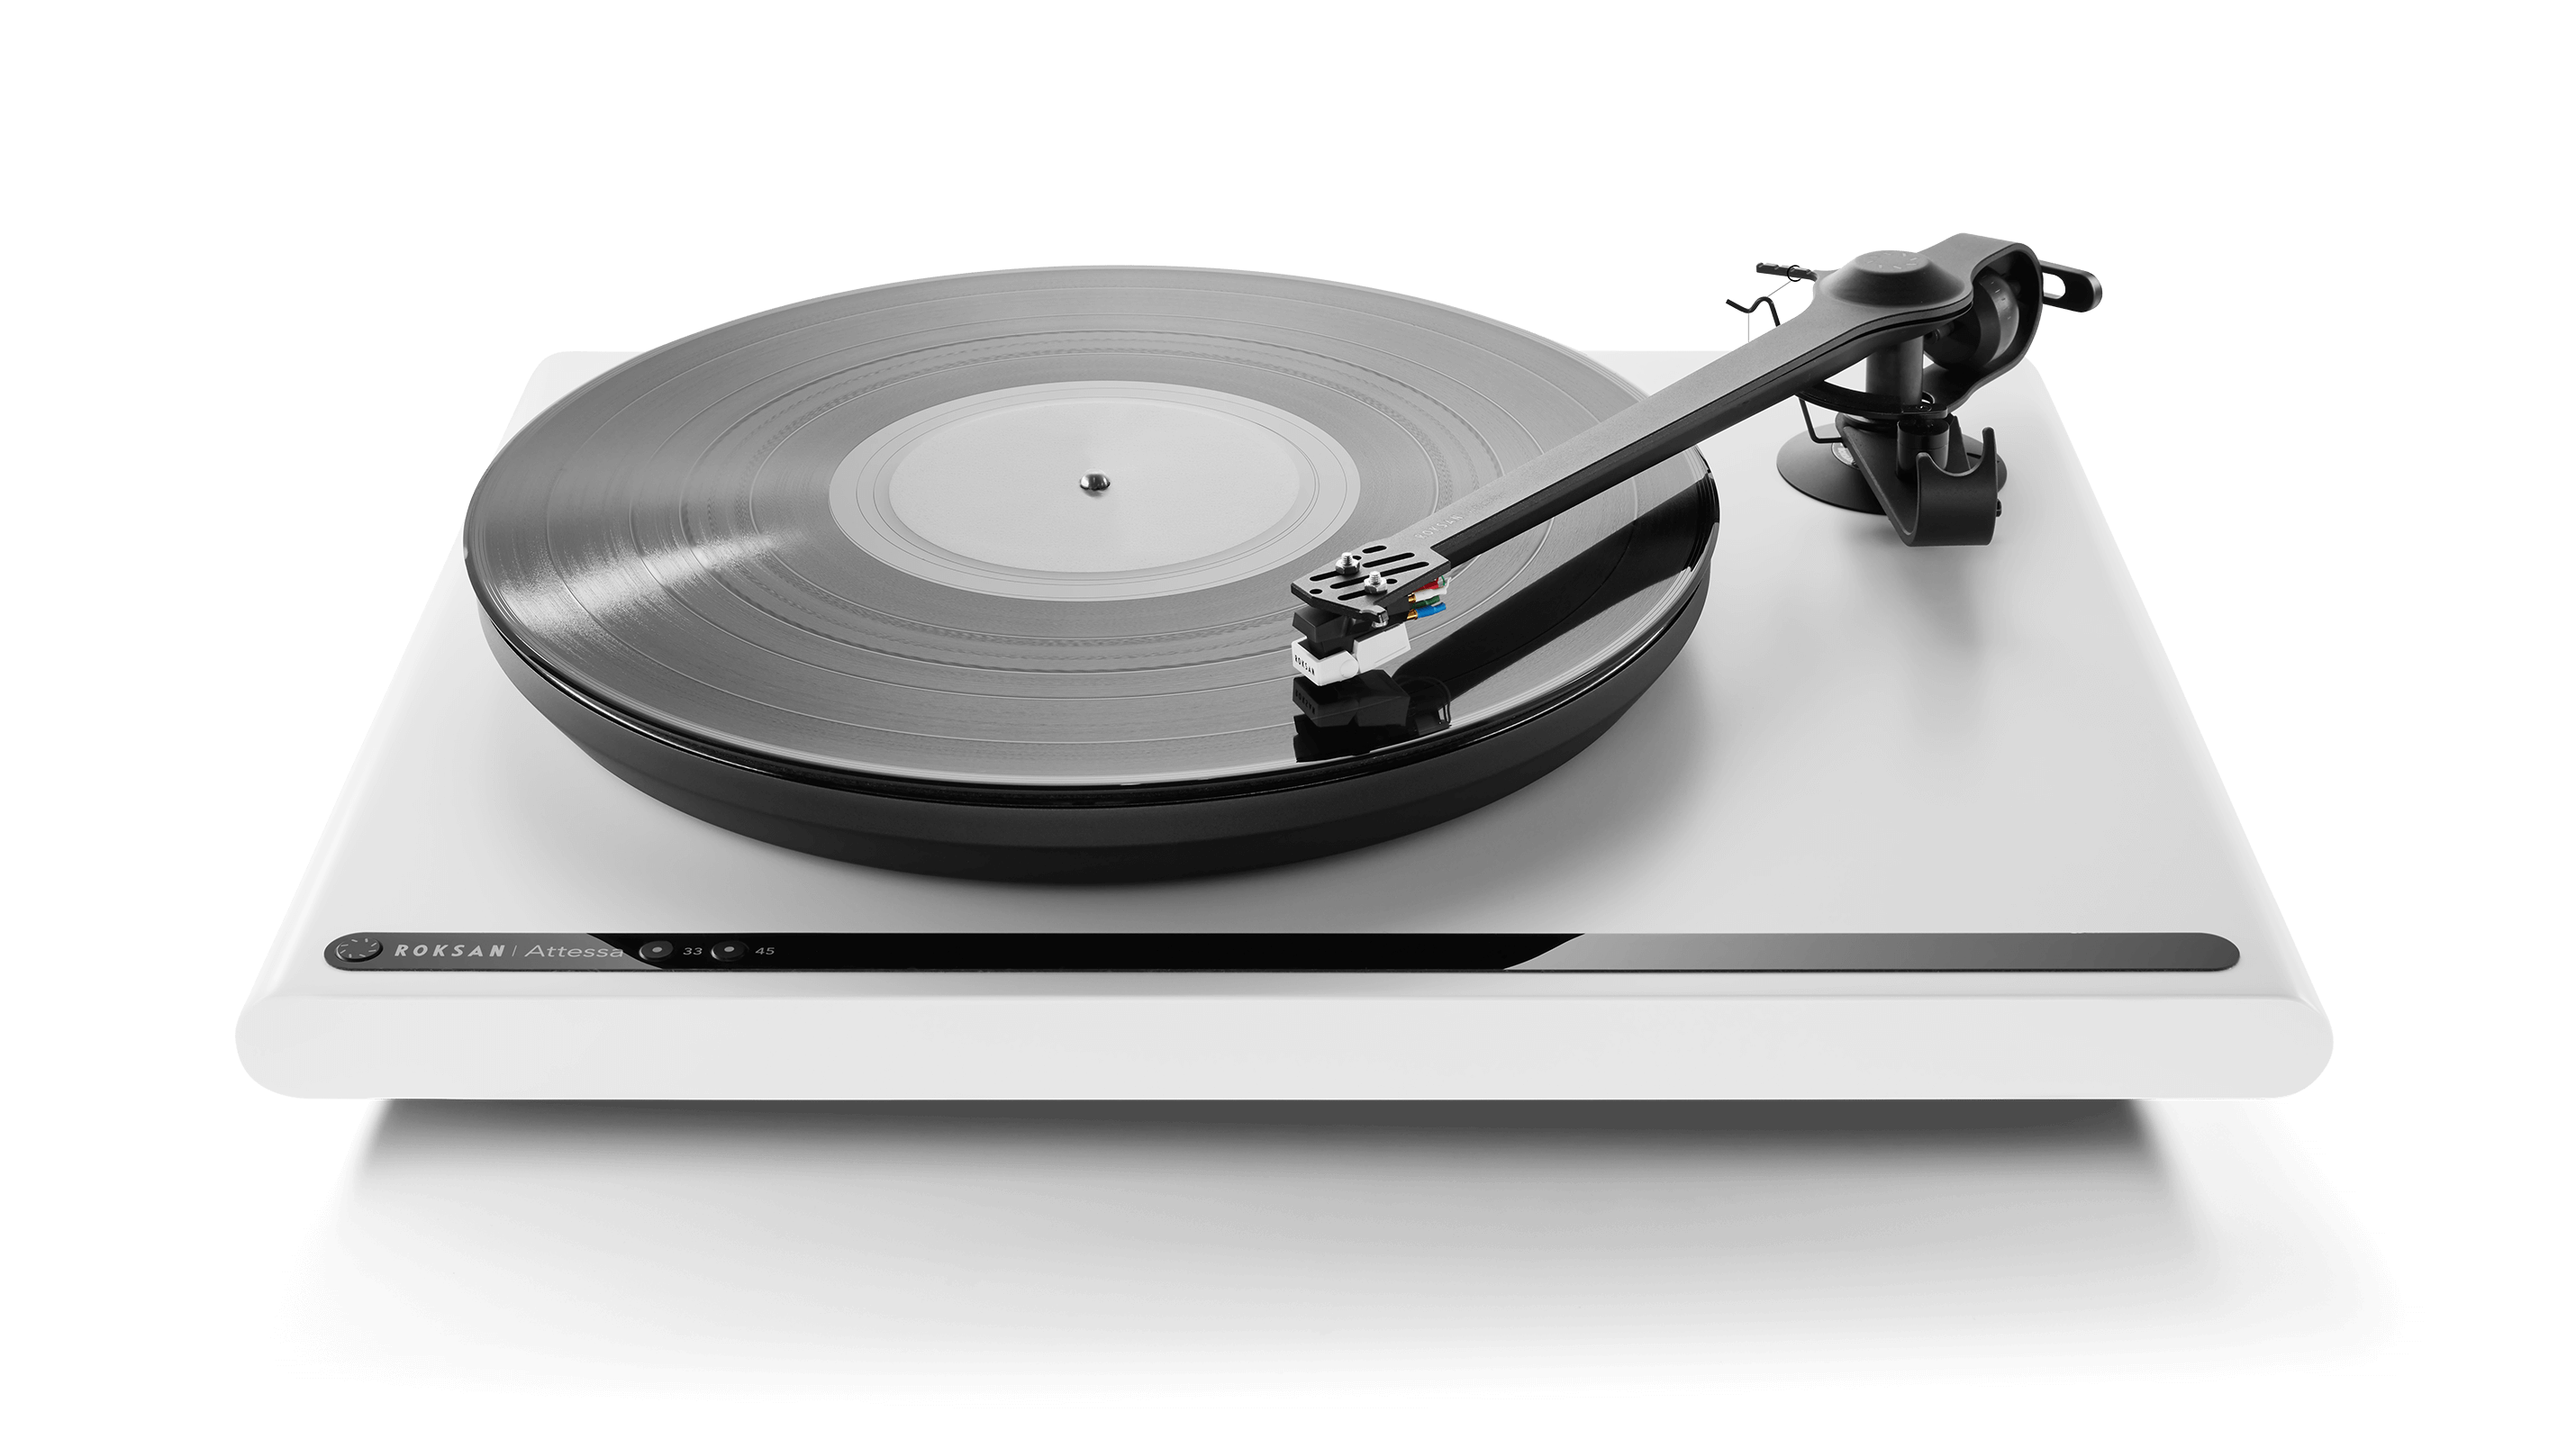 Roksan Attessa Turntable with Cartridge and Phonostage (available to demo)